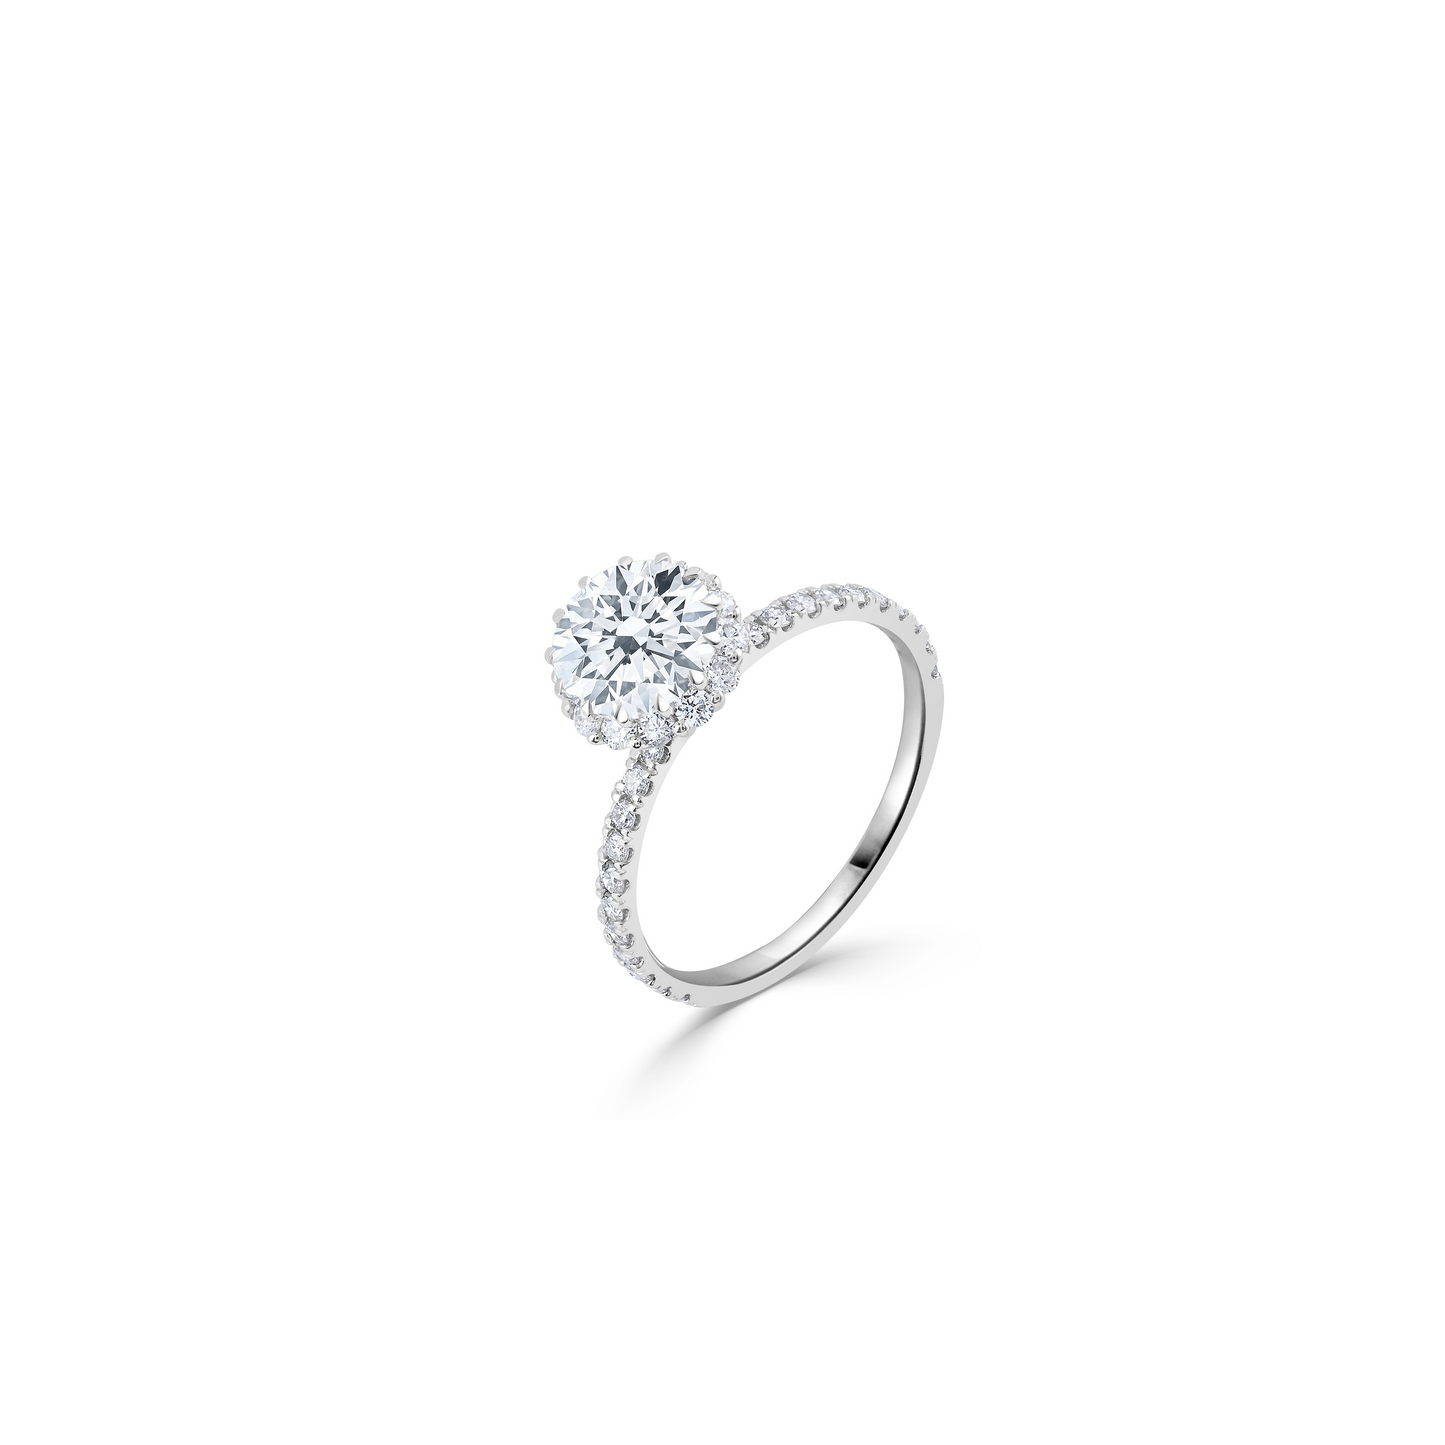 Circular Radiance: Elevate Your Style with a Lab-Grown Diamond Ring in Captivating Round Shape!